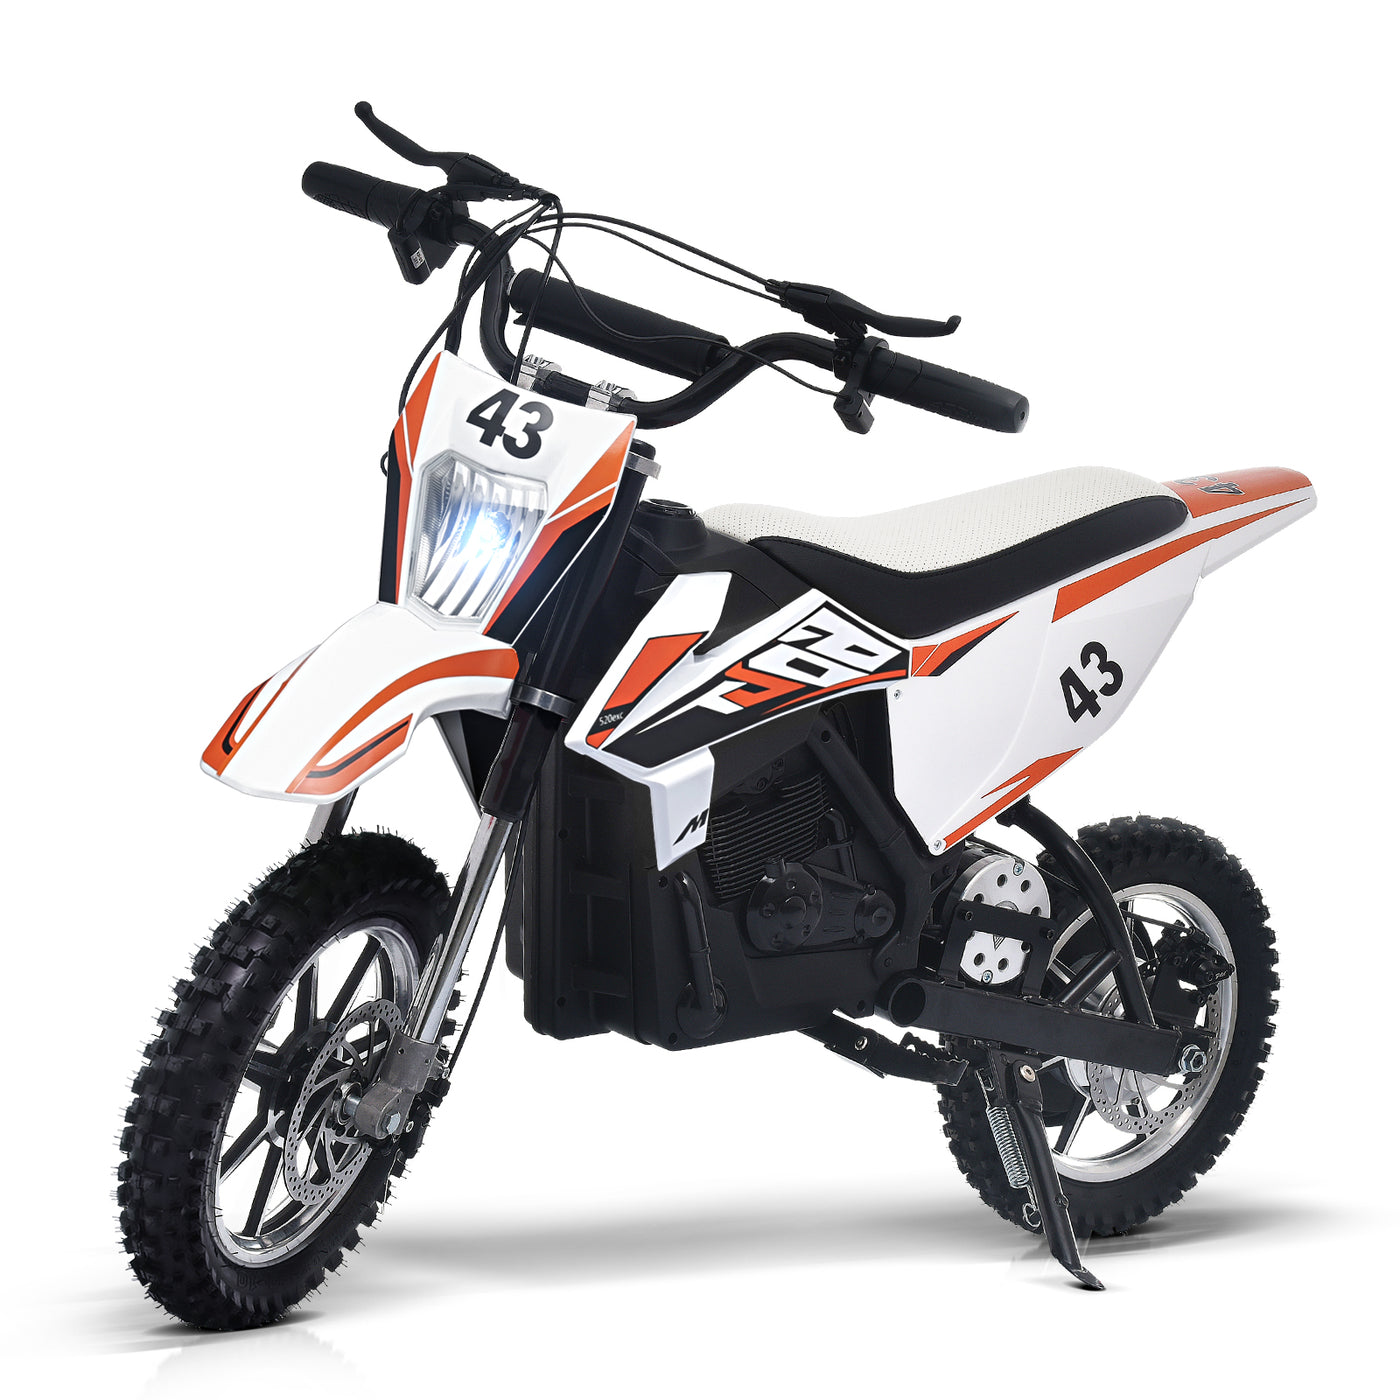 Blitzshark 36V Kids Electric Dirt Bike Off-Road Bike Motocross Powerful Motorcycle for Kids, with 15.5MPH Fast Speed, Rubber Tires, Twist Grip Throttle, Metal Suspension, Leather Seat, SRK-MC20